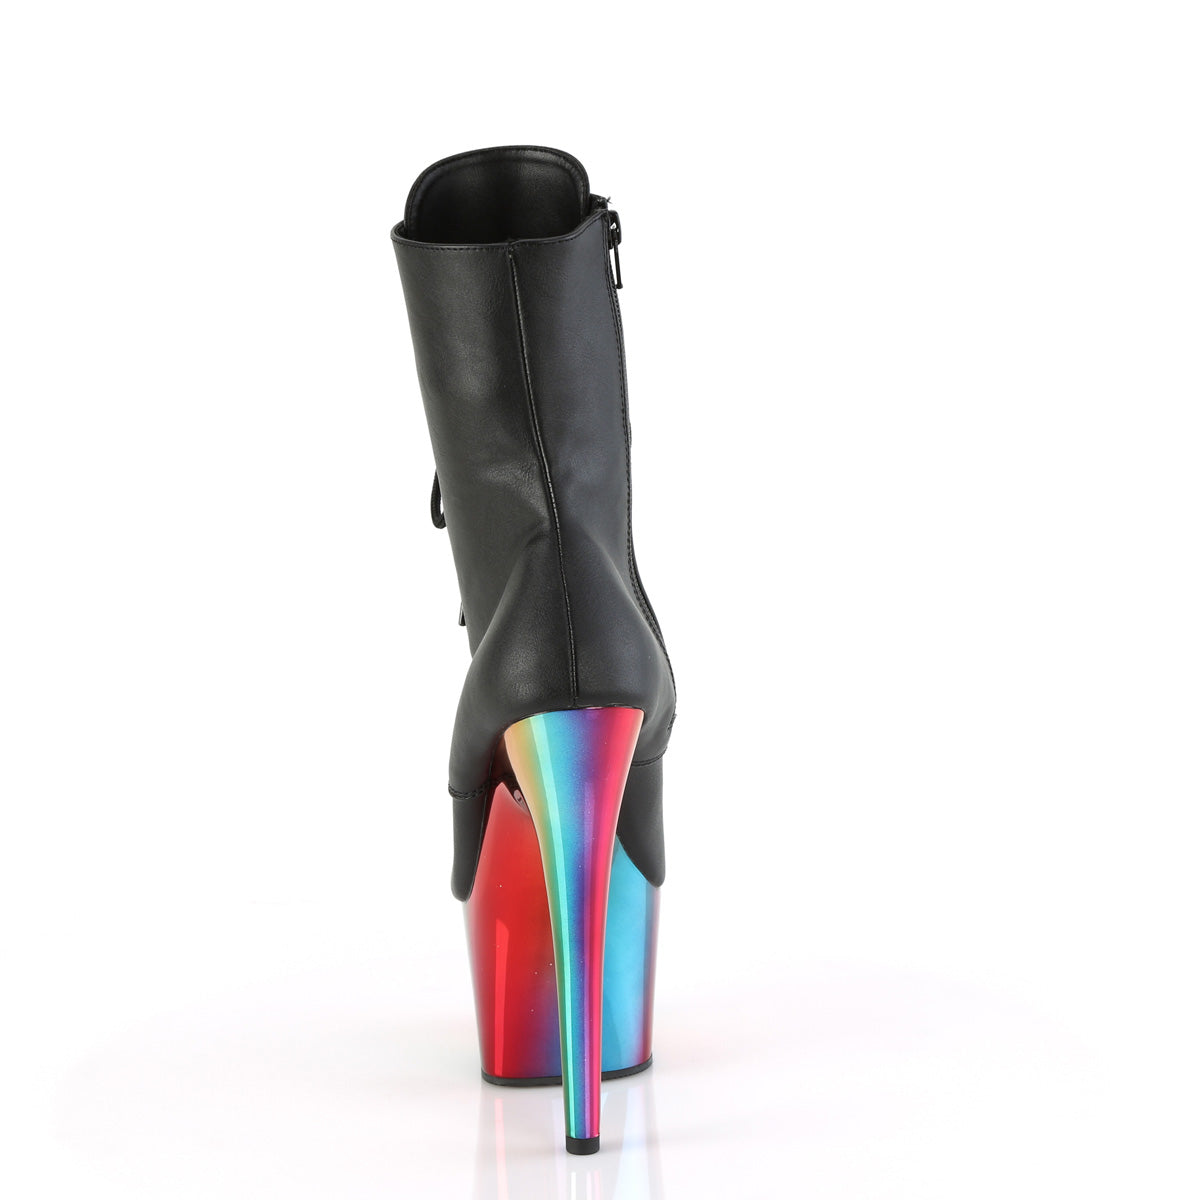 Pleaser  Ankle Boots ADORE-1020RC Blk Faux Leather/Rainbow Chrome